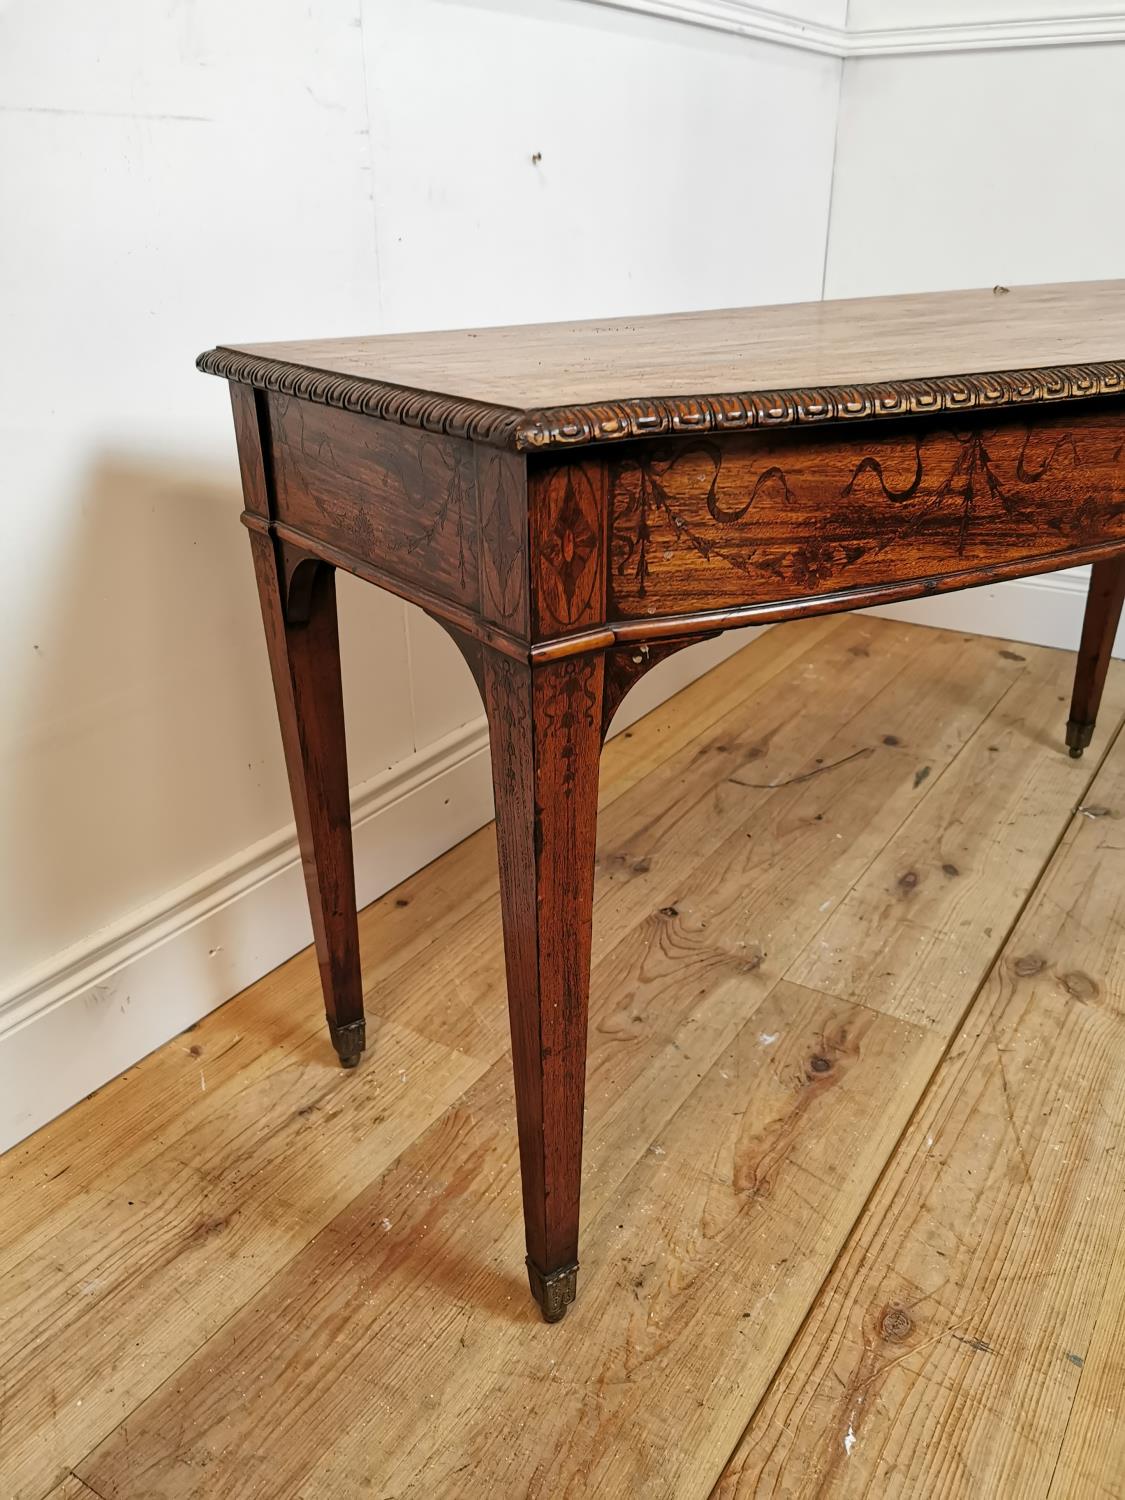 19th C. inlaid satinwood side table - Image 4 of 5